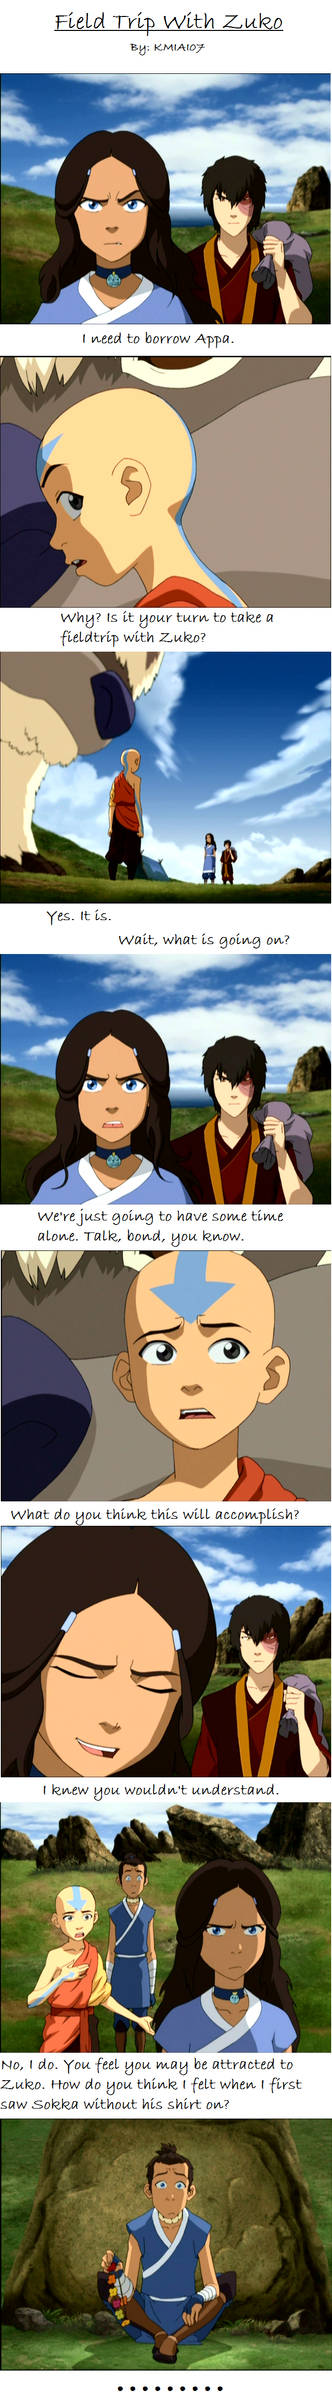 Field Trip with Zuko 1 by the-rose-of-tralee